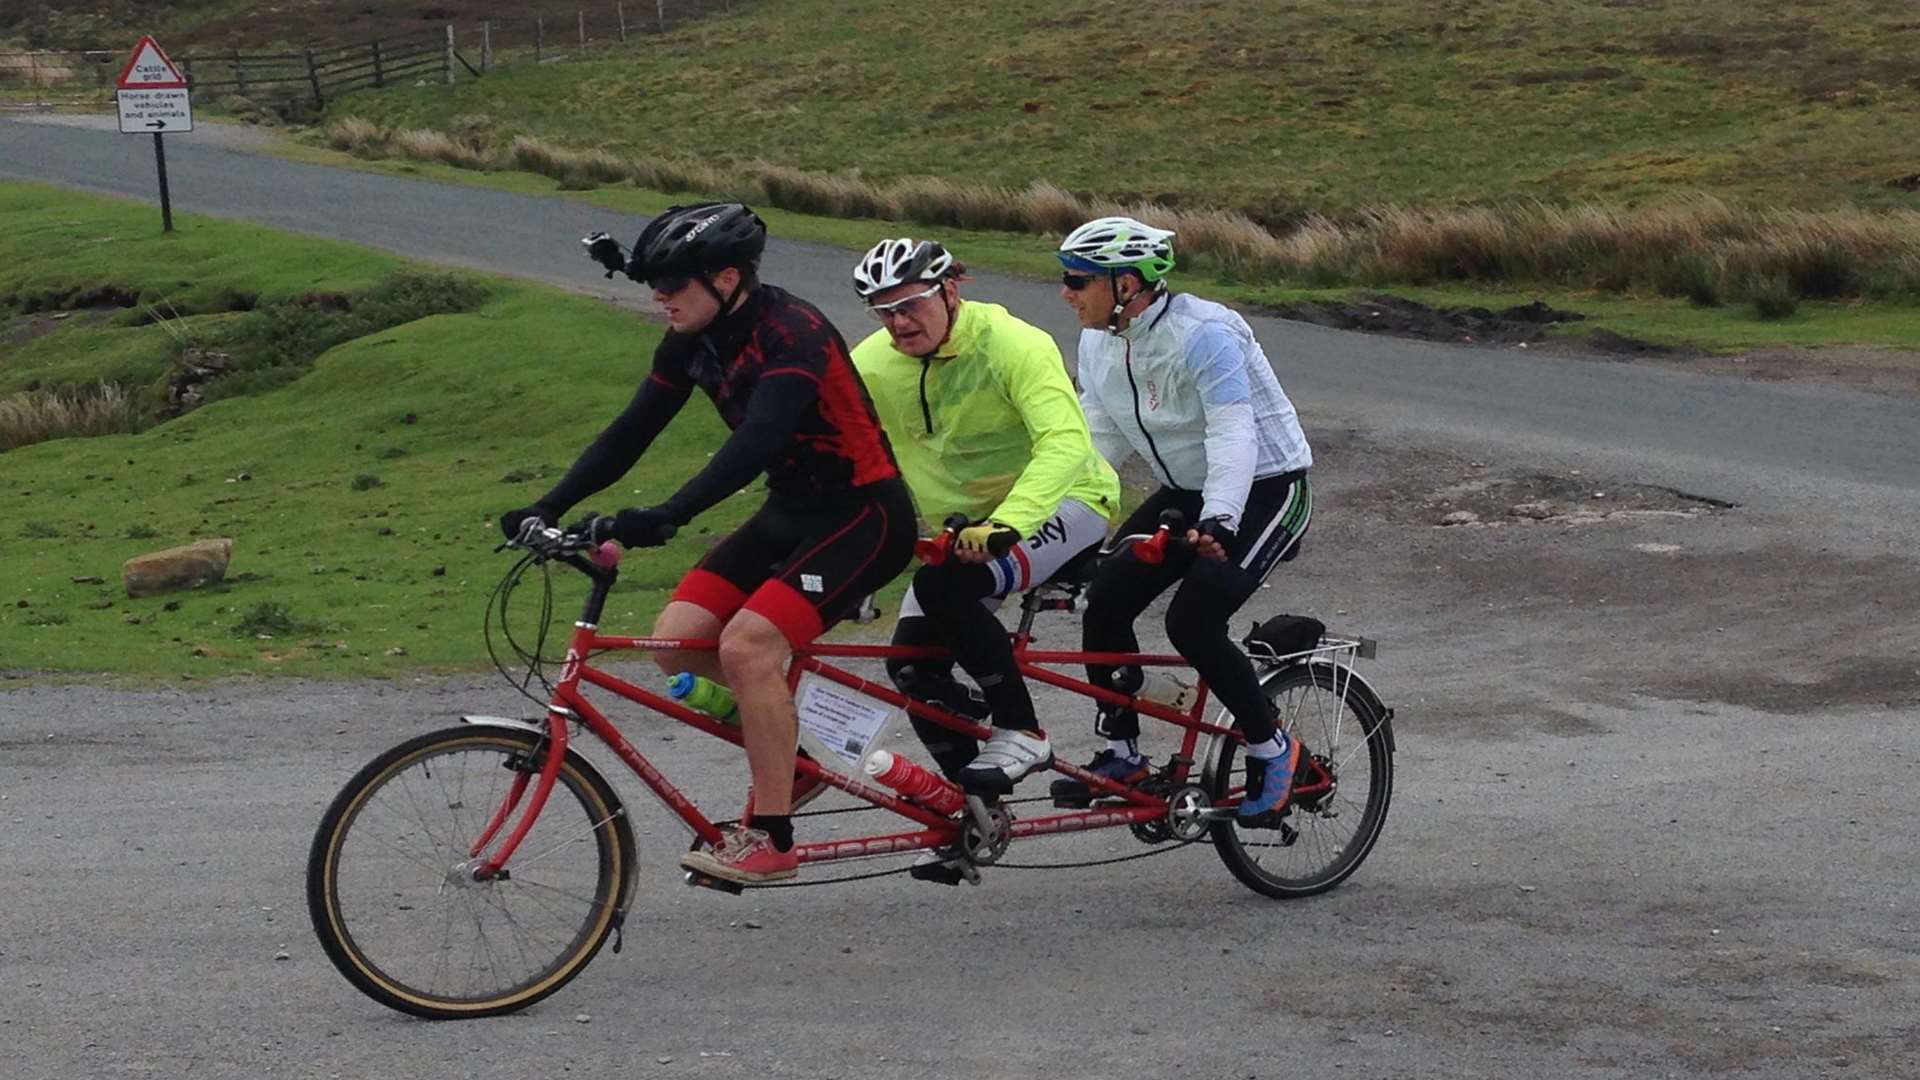 Billy Spellman, Andy Gray and Andy Leyland on their trandem.